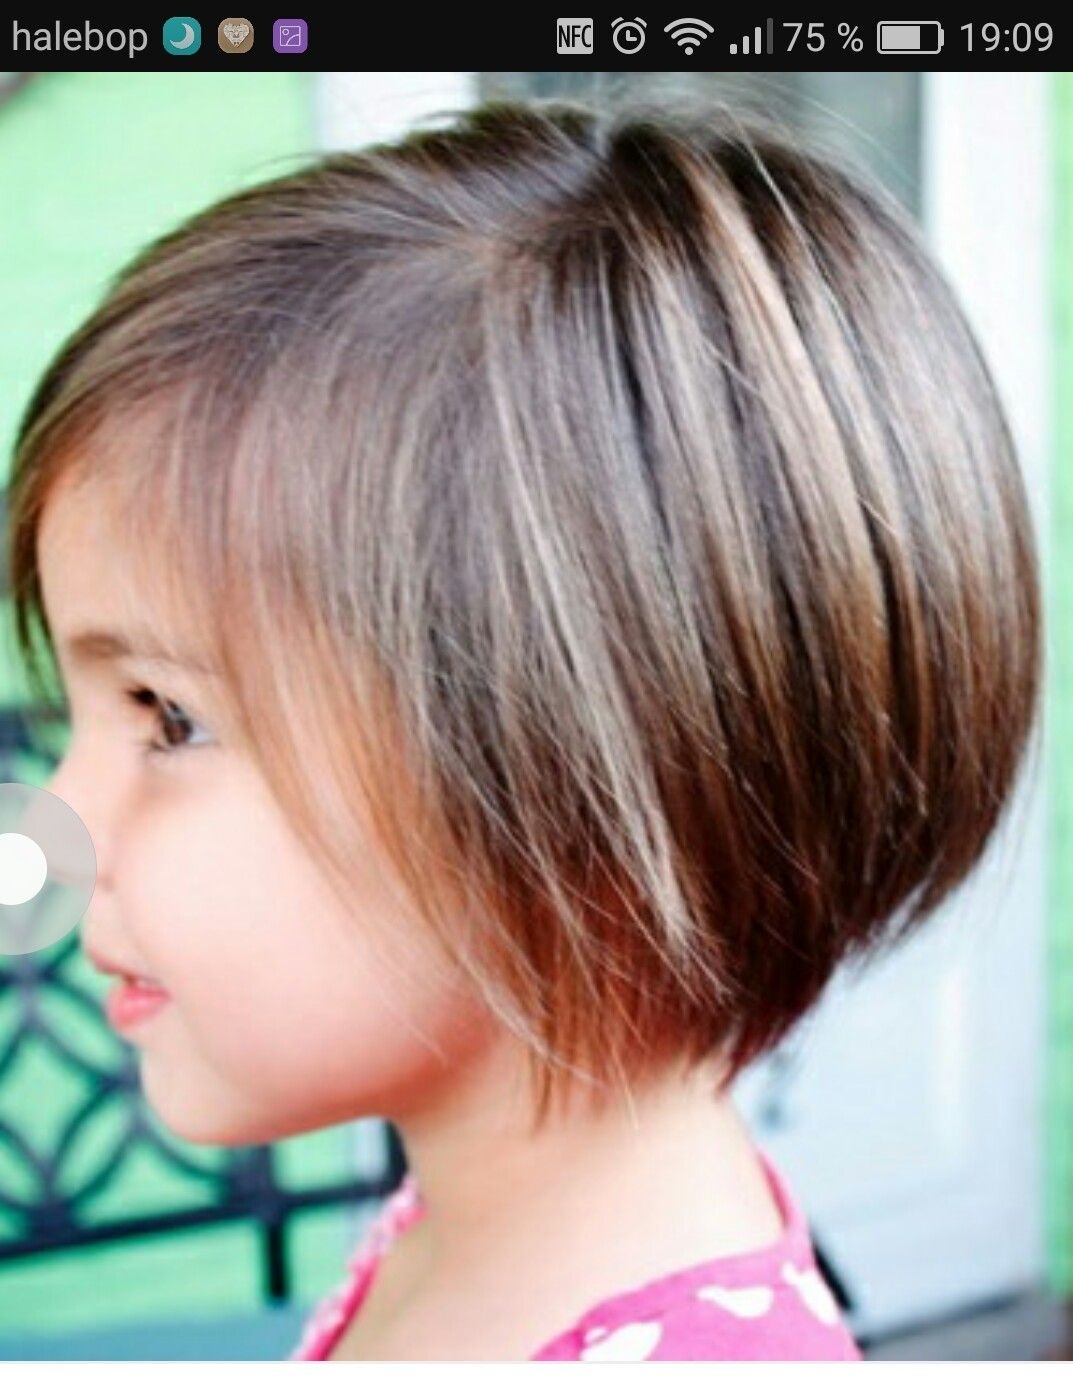 Leks Hsur | Girls Hair Style In 2019 | Girl Haircuts, Little for Baby Girl Short Hairstyles